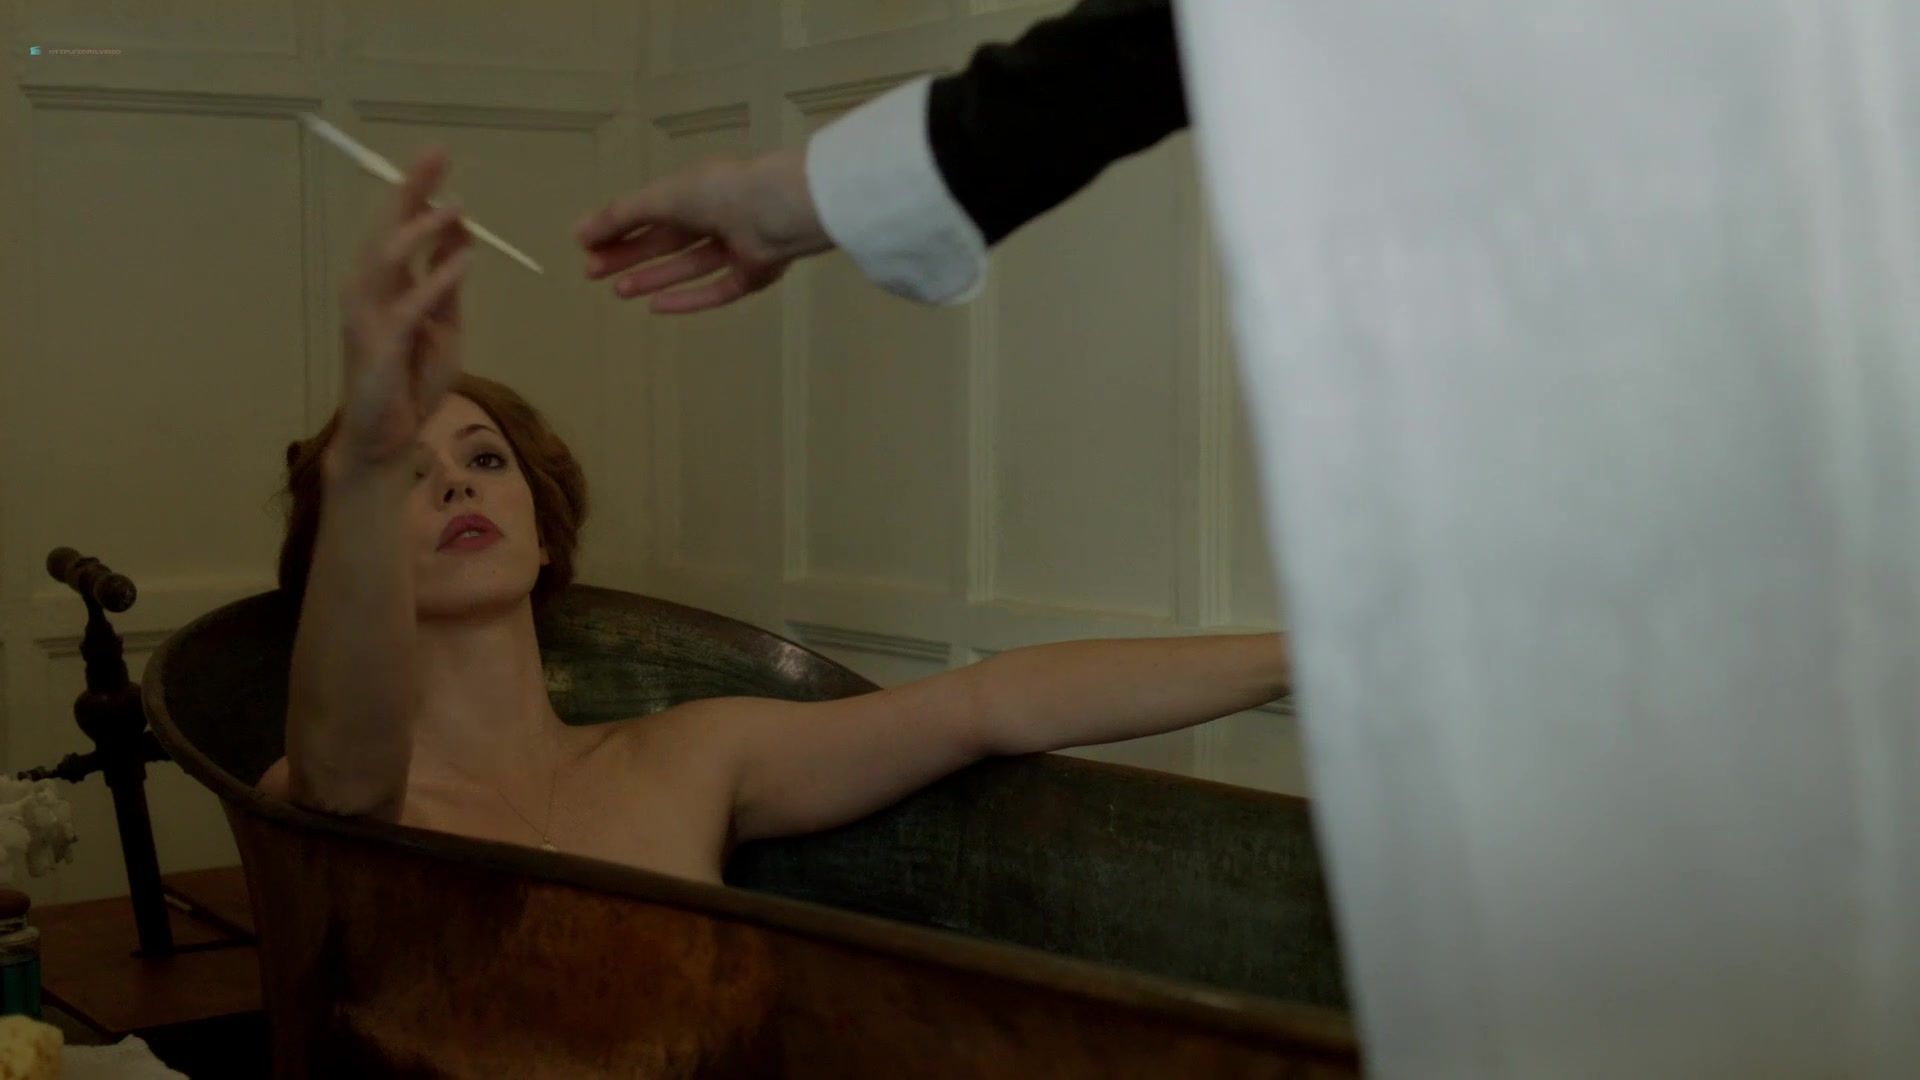 Celebrity Porn Rebecca Hall, Adelaide Clemens naked - Parades End (2012) BooLoo - 2